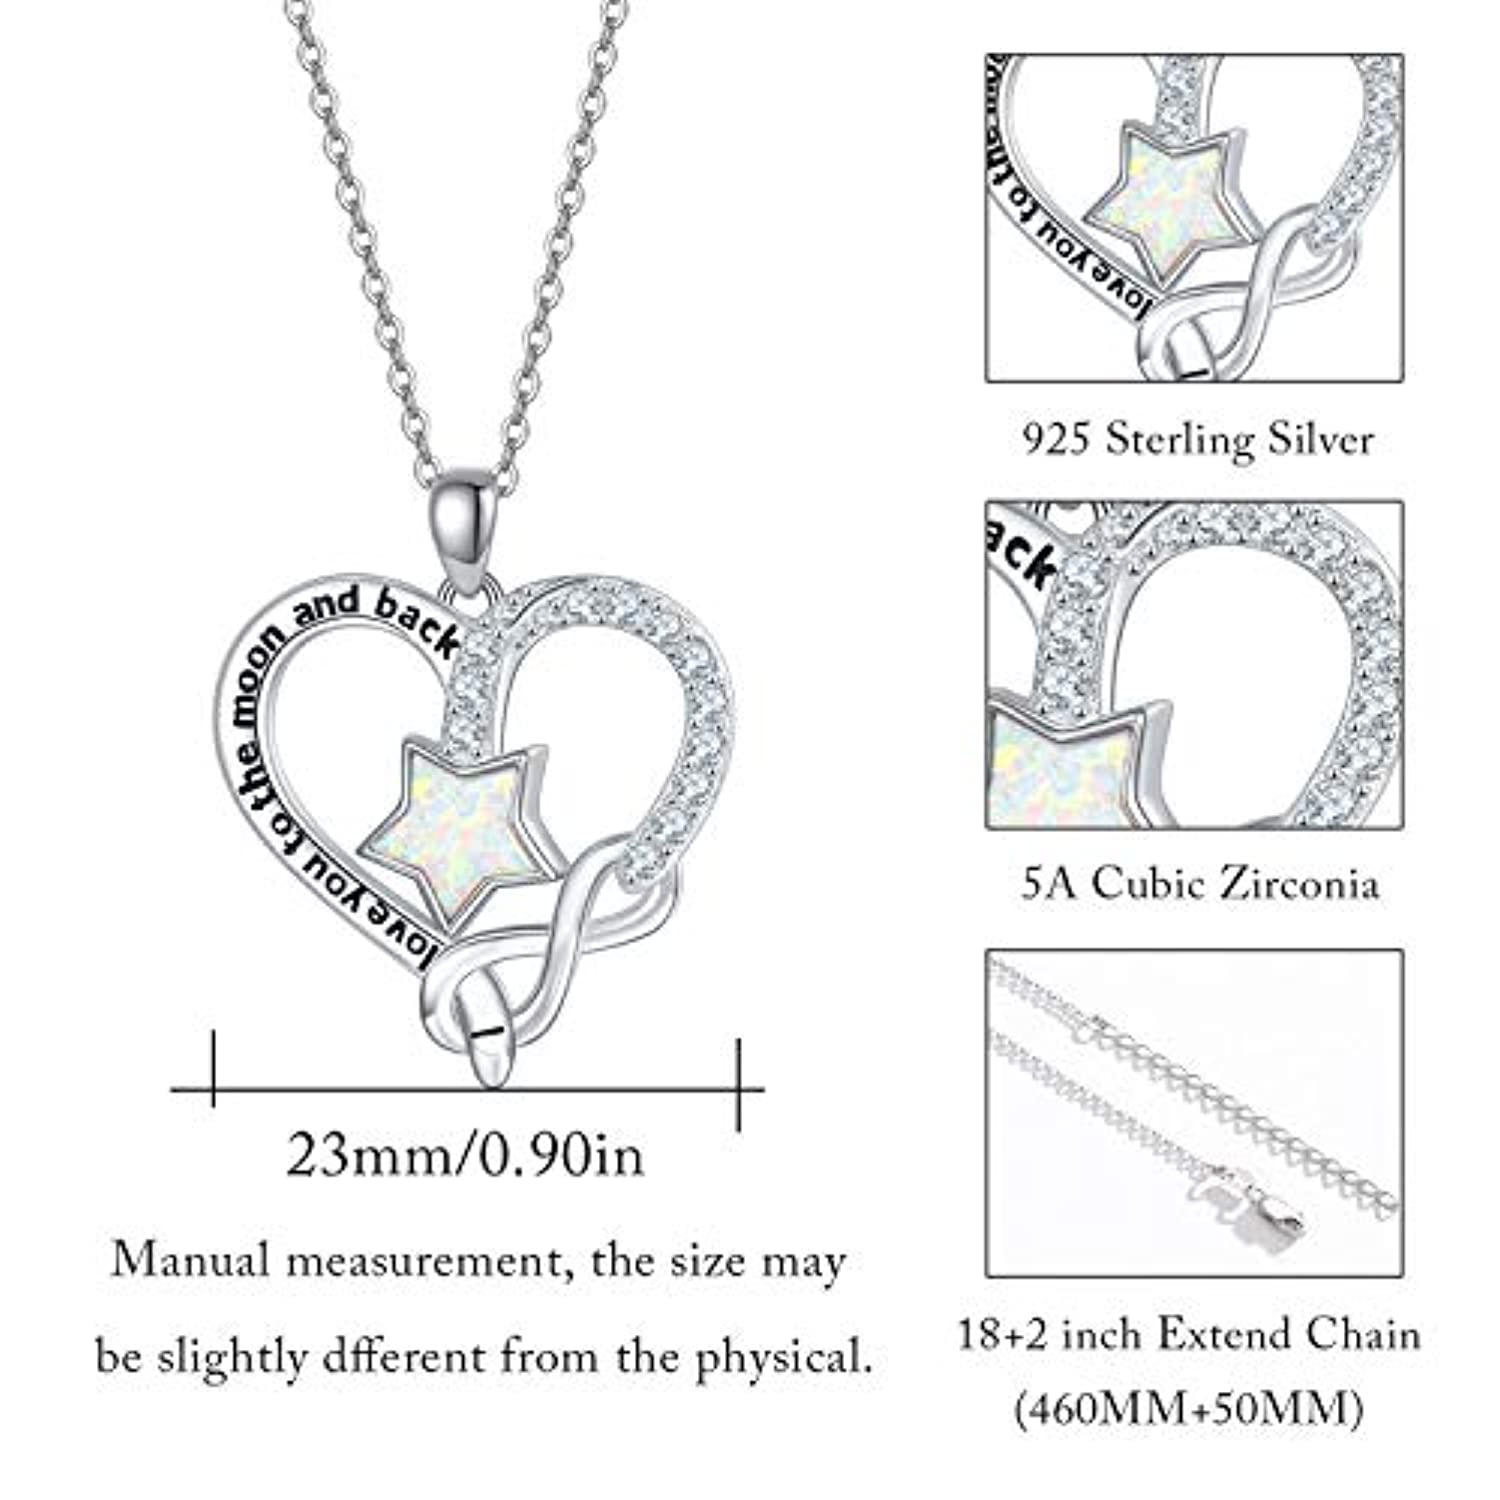 Opal Star Necklace Love Heart Infinity Pendant I Love You to The Moon and Back Sterling Silver Jewelry Gift for Women